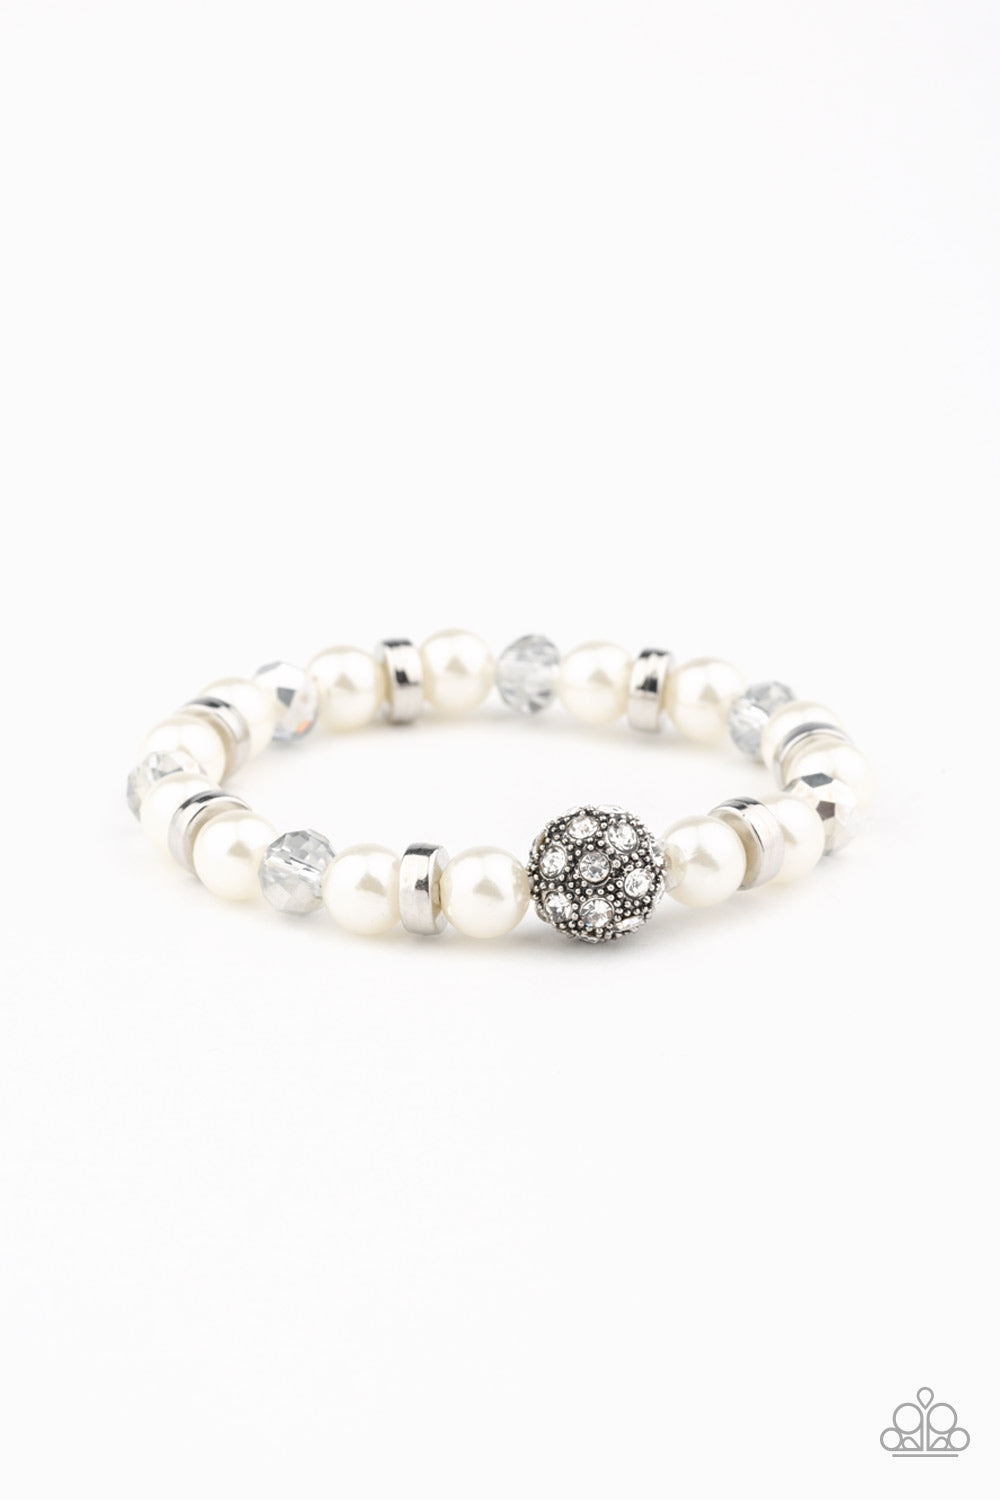 Twinkling Timelessness - White